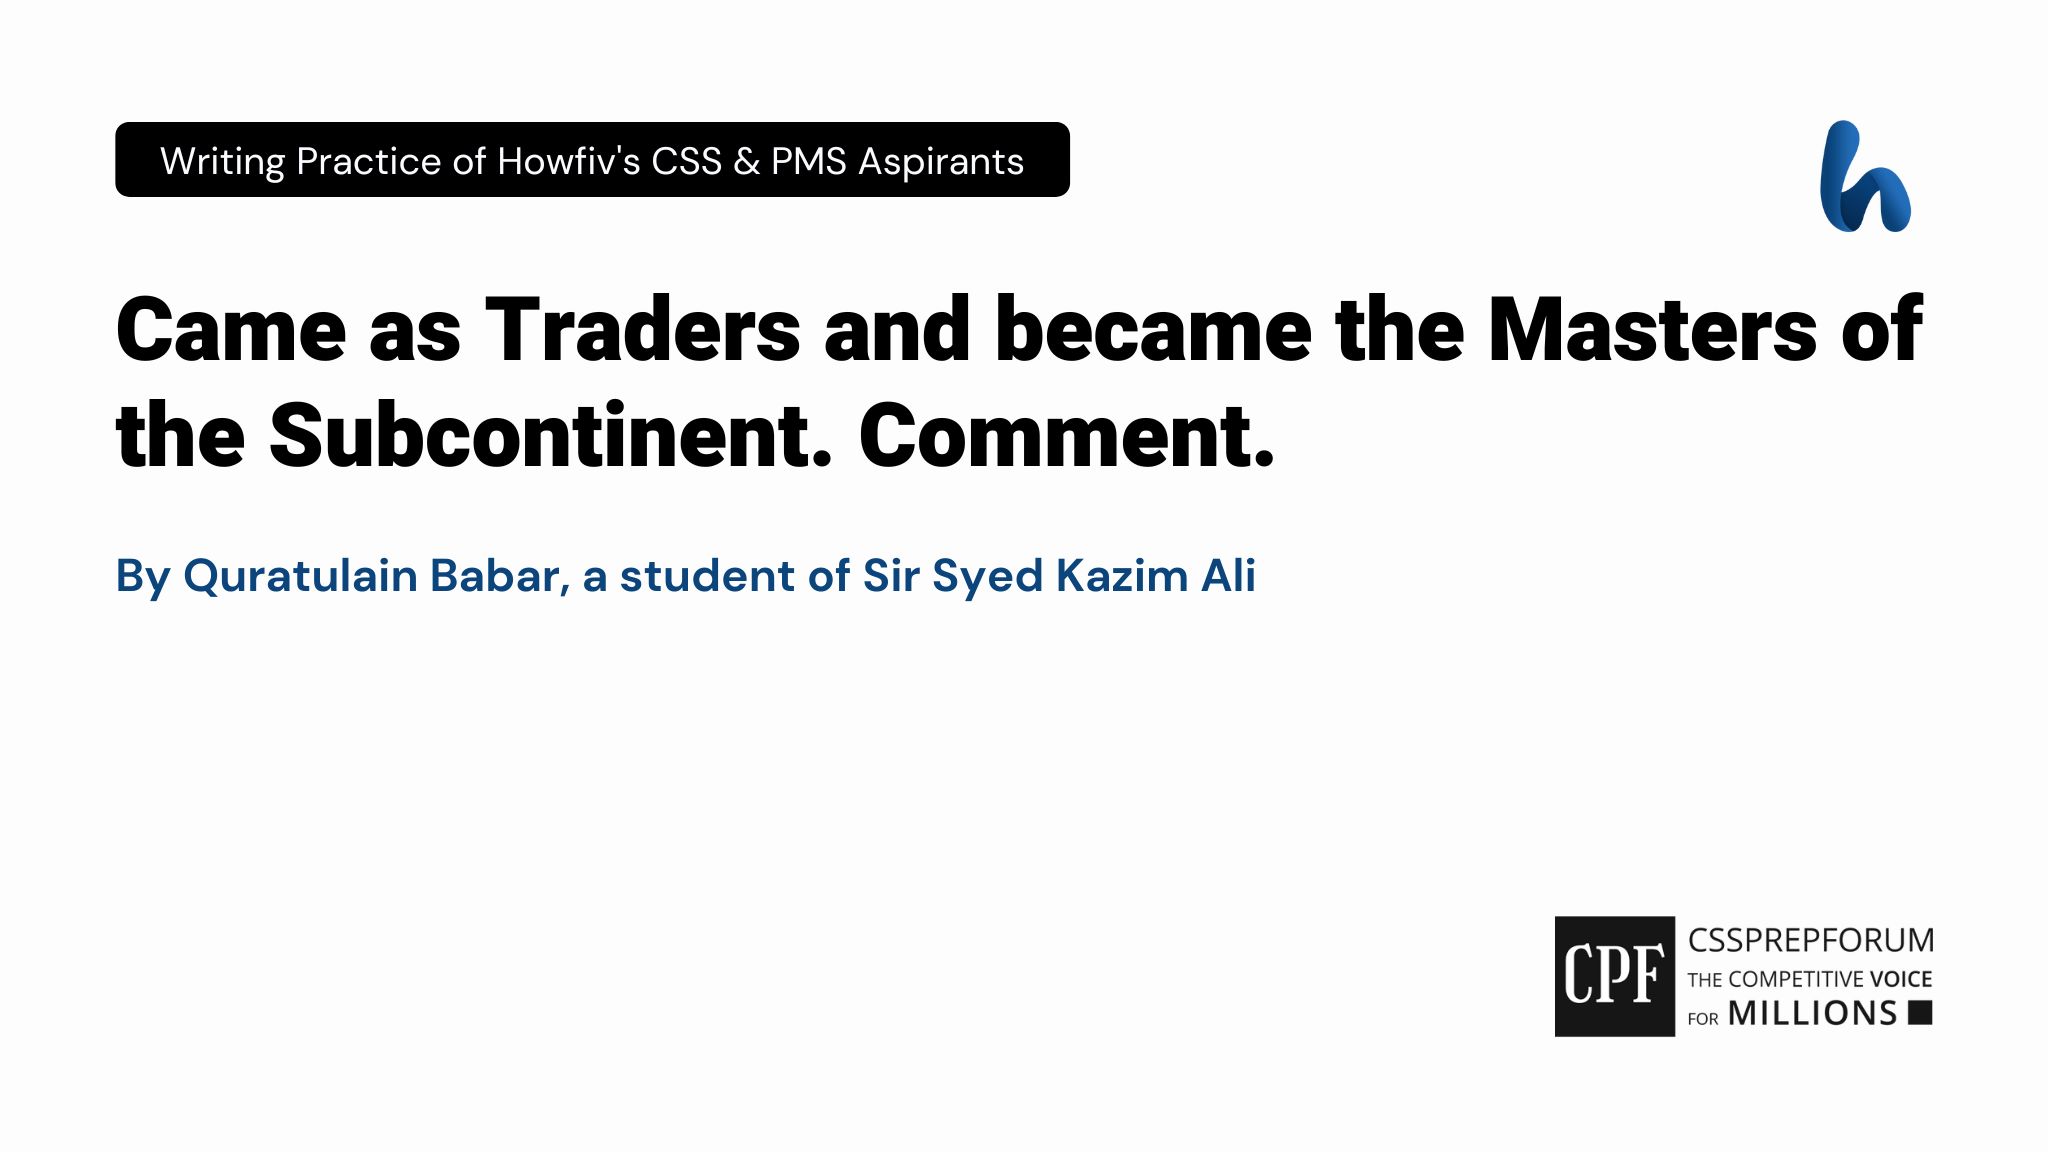 Came as Traders and became the Masters of the Subcontinent. Comment.